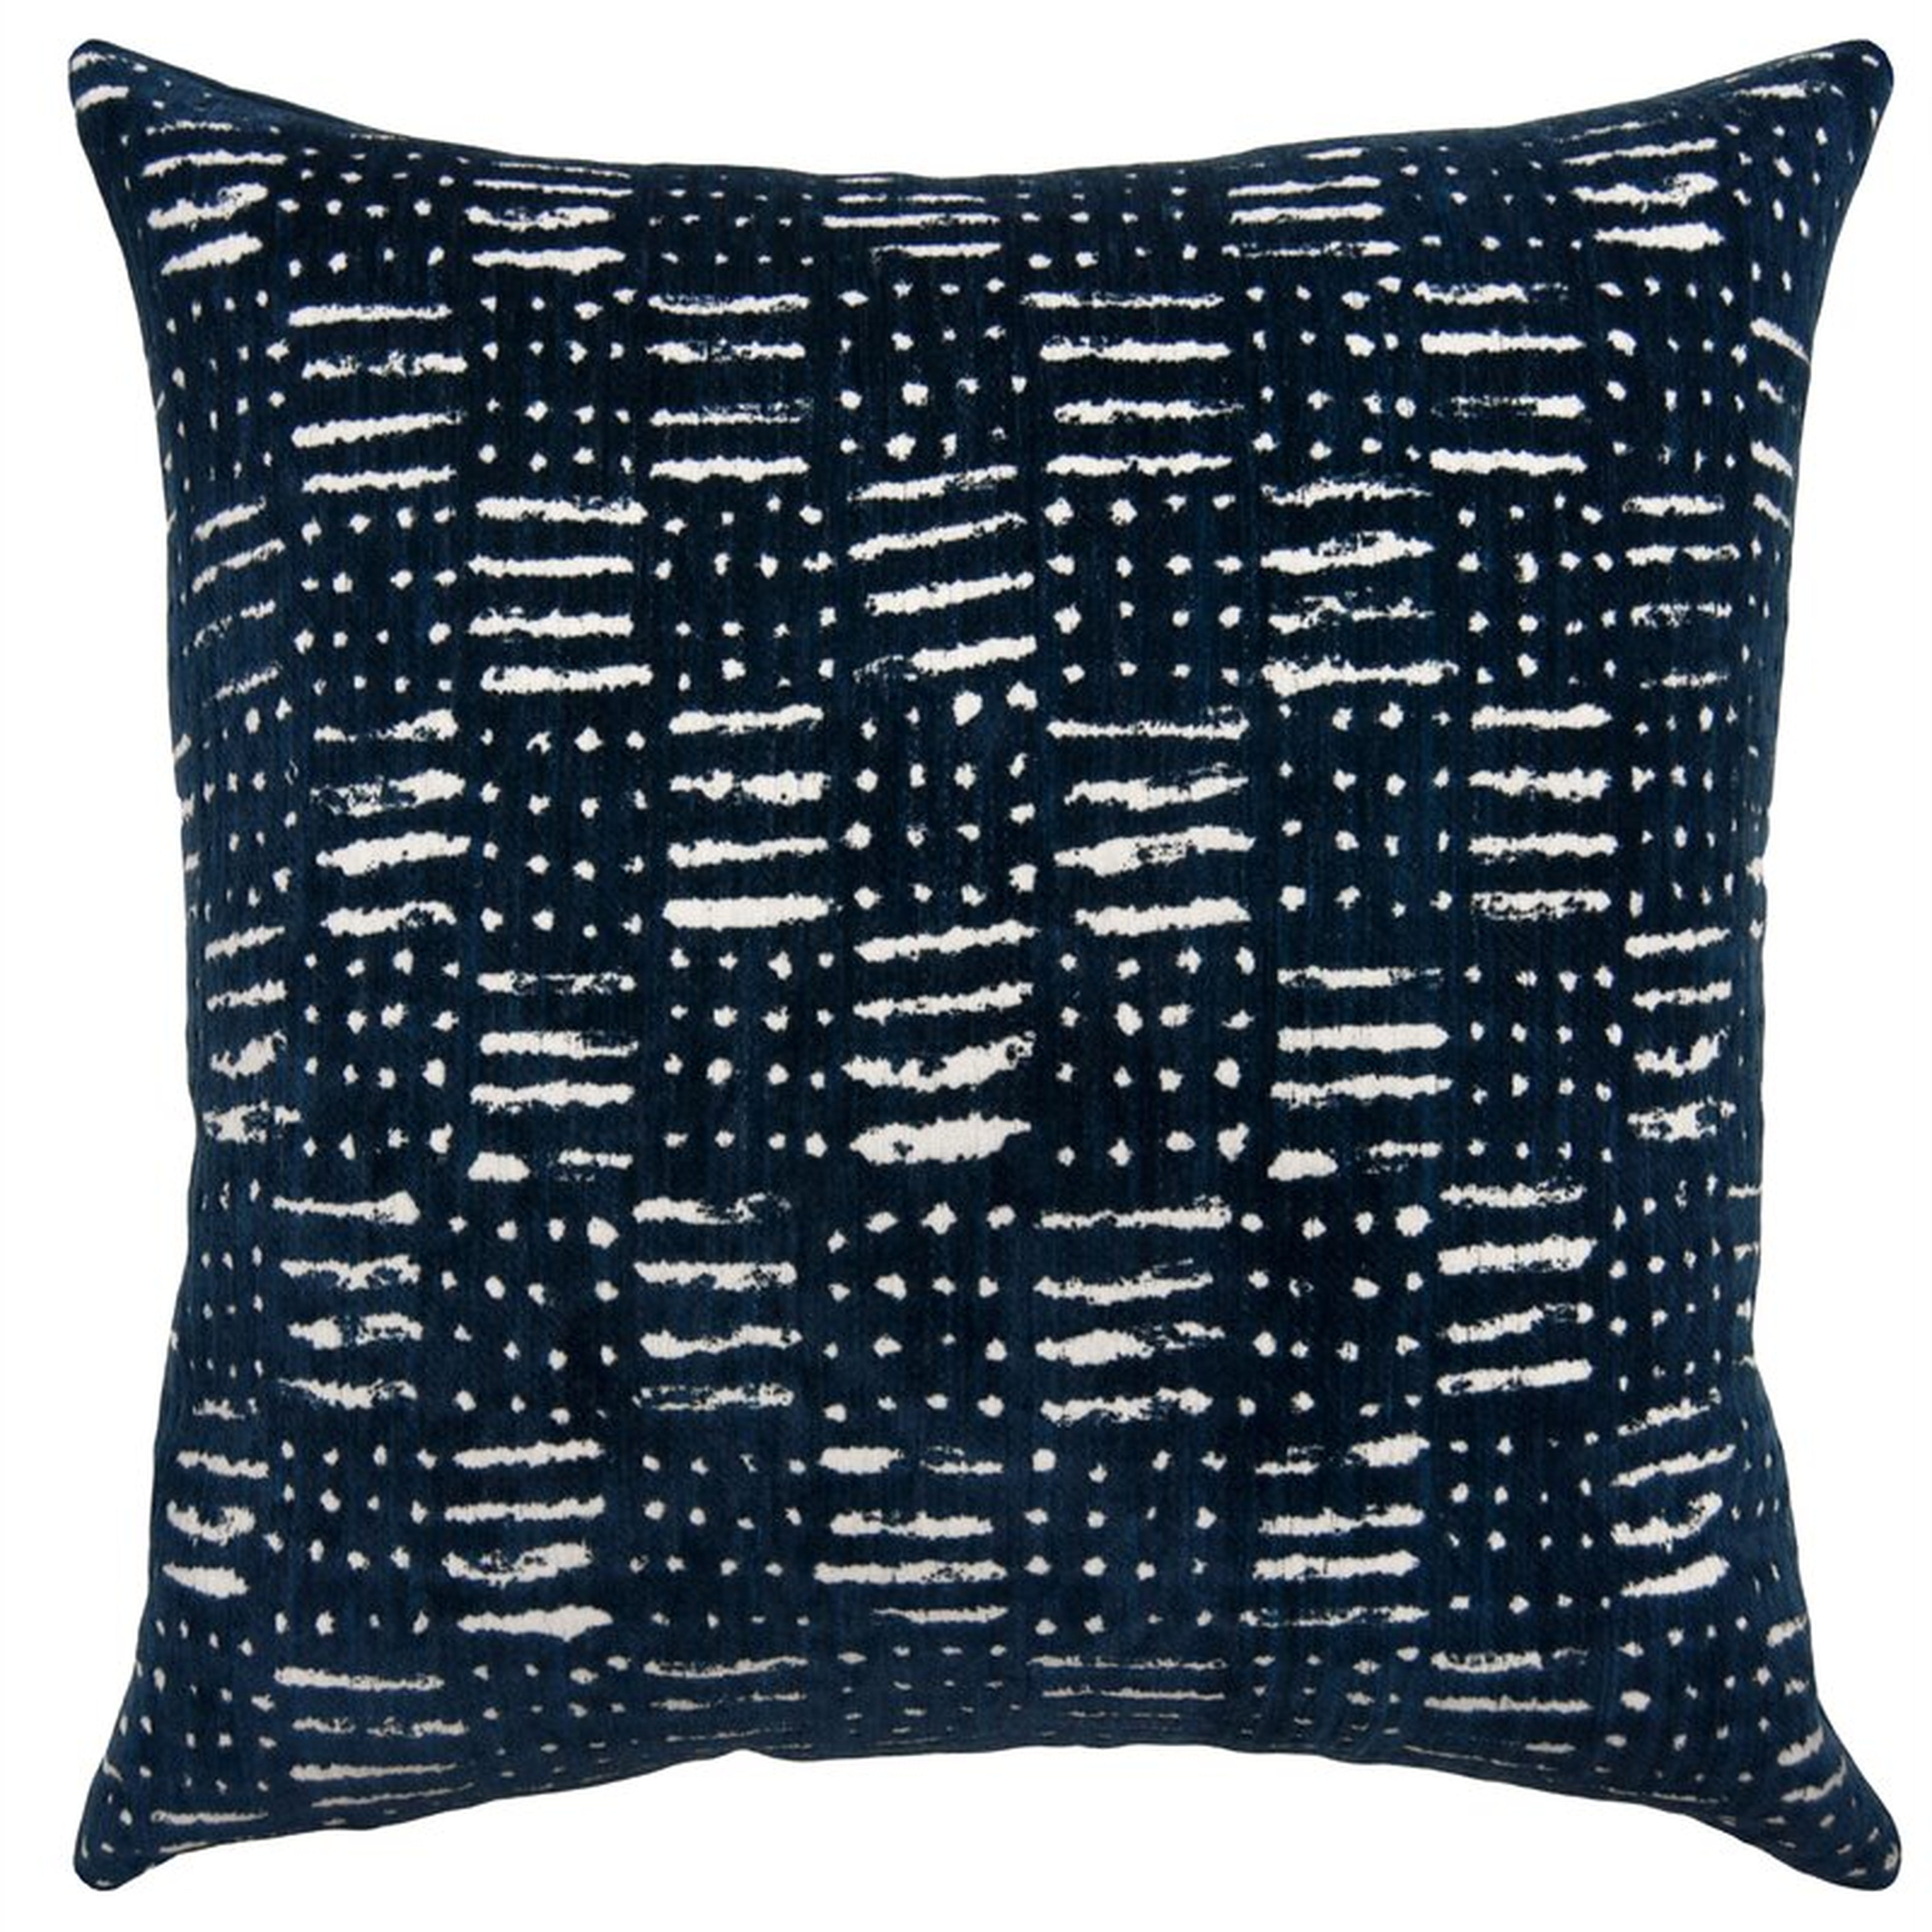 Square Feathers Seal Pillow Cover & Insert - Perigold